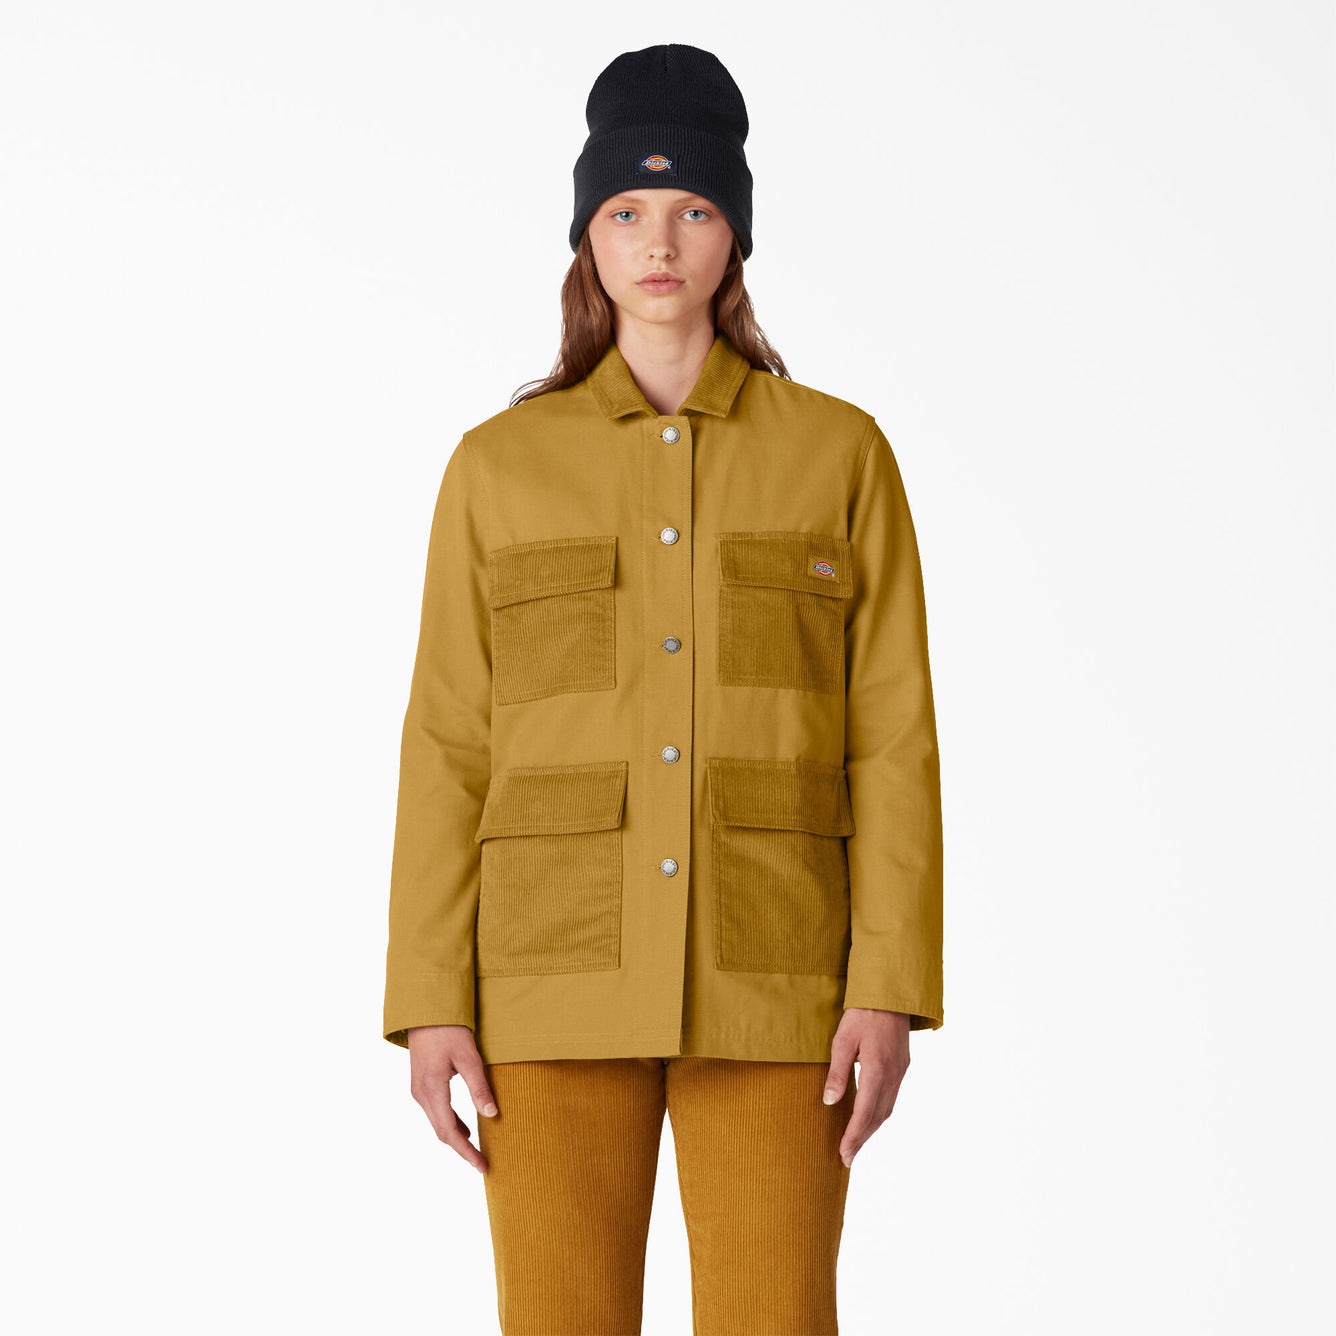 Dickies  -  #FJR01 Women’s Reworked Chore Coat, Bronze Mist work jacket - cold weather protection